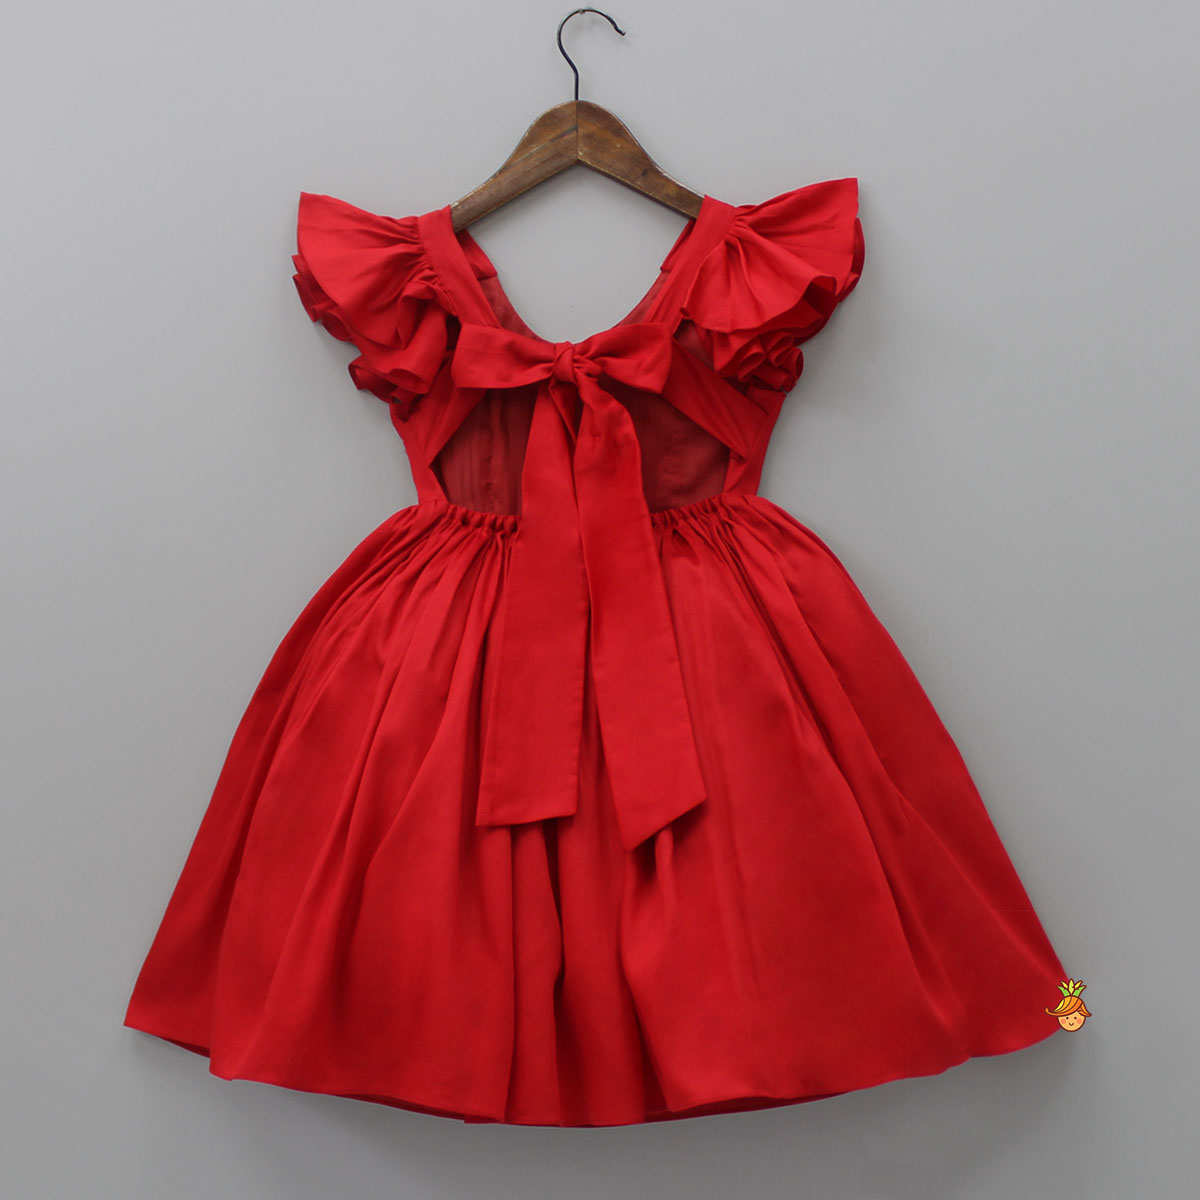 Red Hand Embroidered Frilly Dress